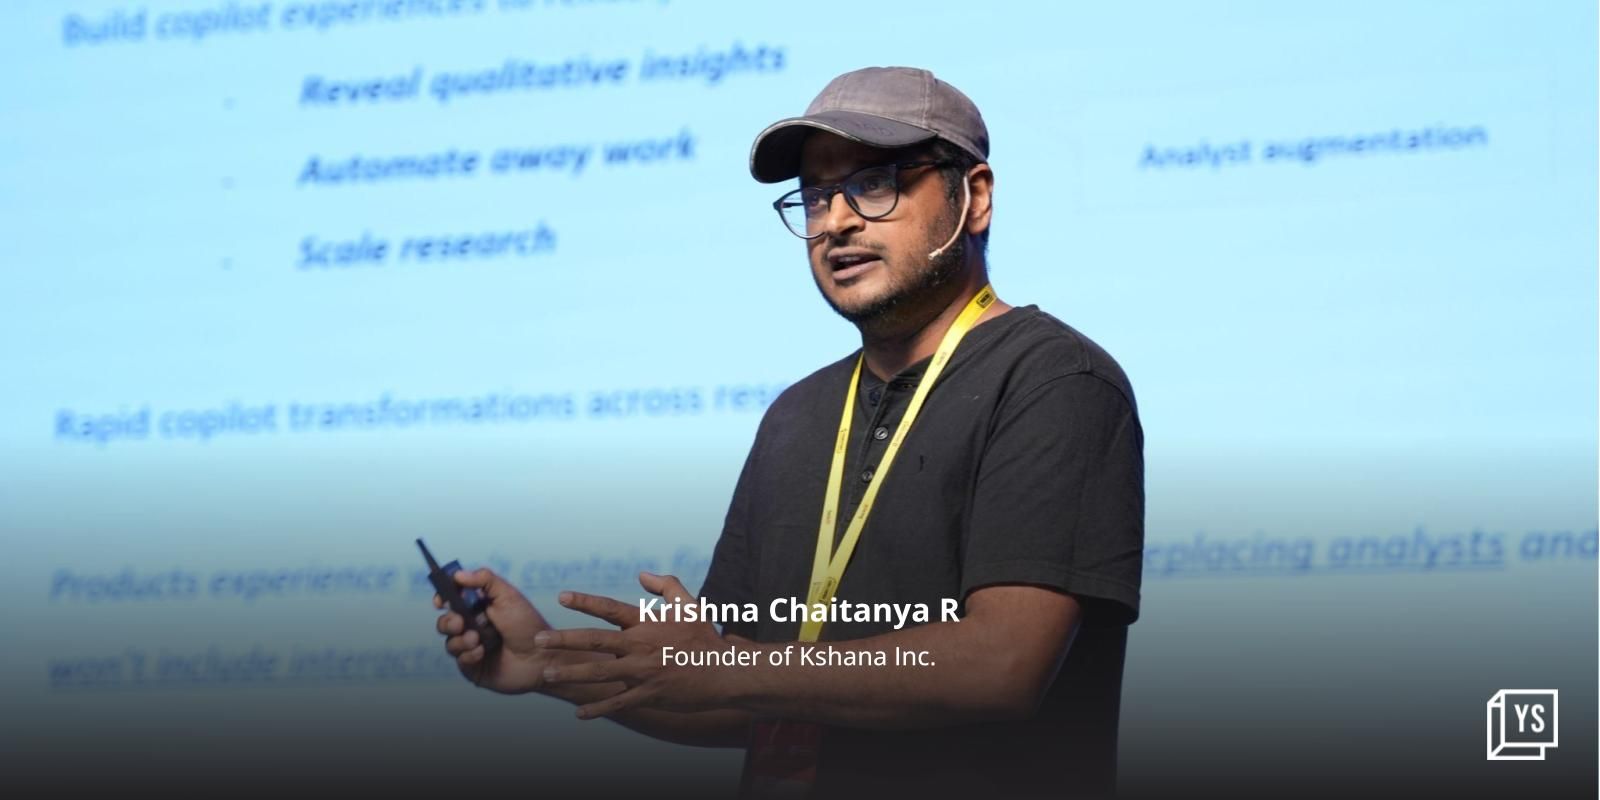 AI-powered asset management startup Kshana aims to streamline investment research